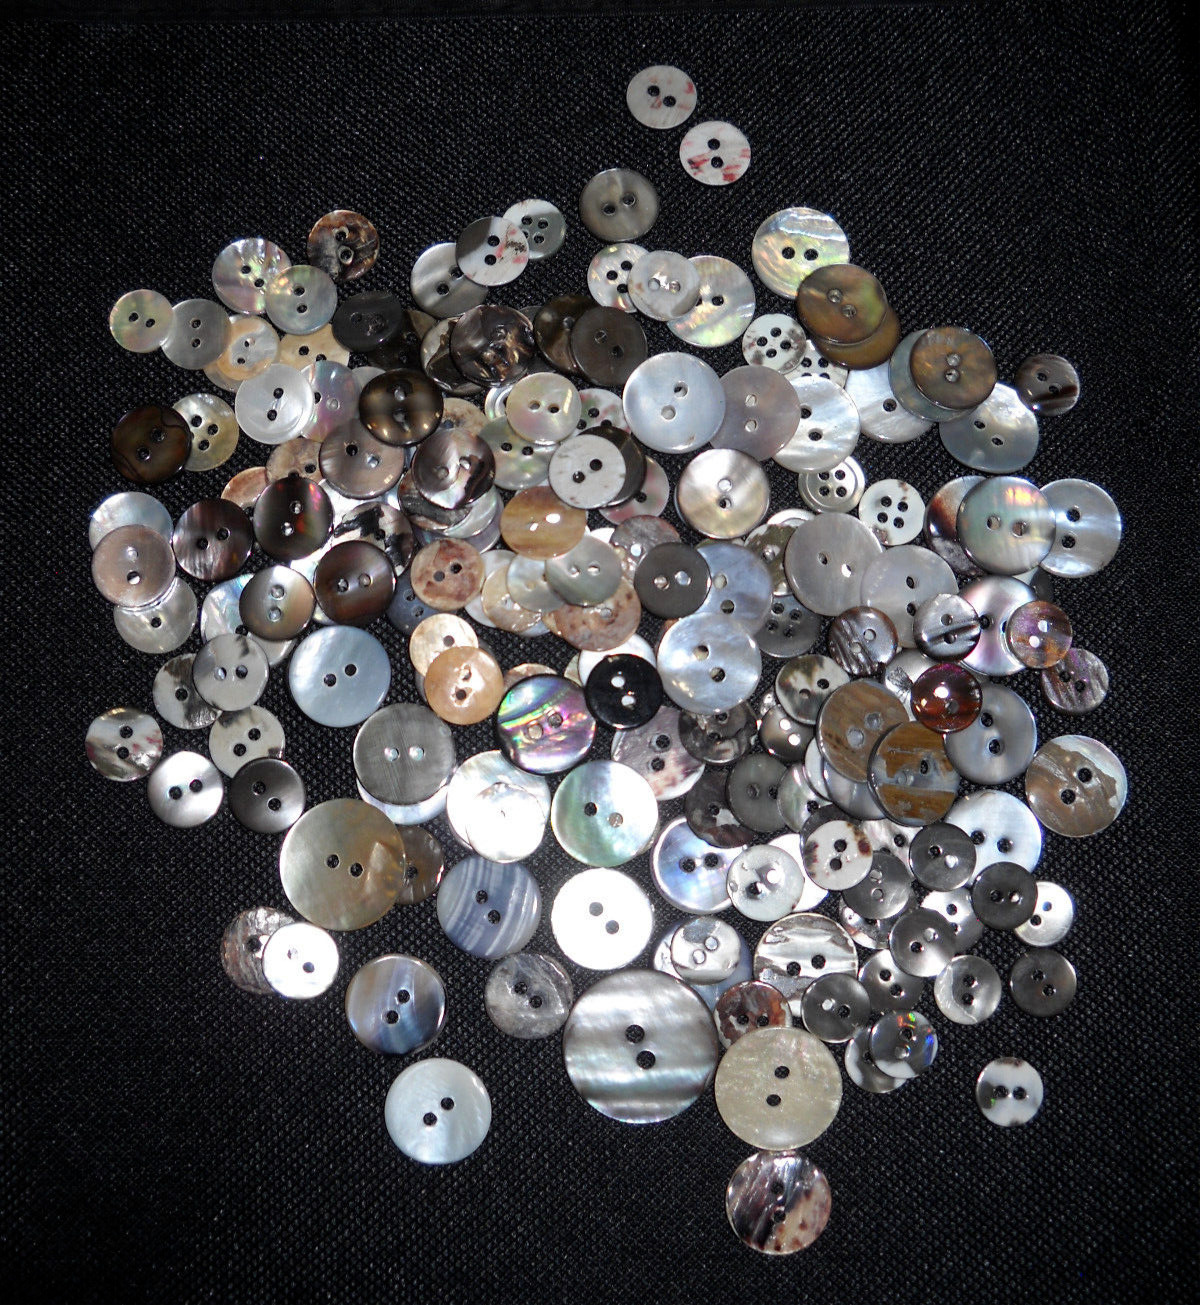 Lot of 190+ ABALONE Pearl Shell Buttons Vintage Sewing Replacement Craft Art